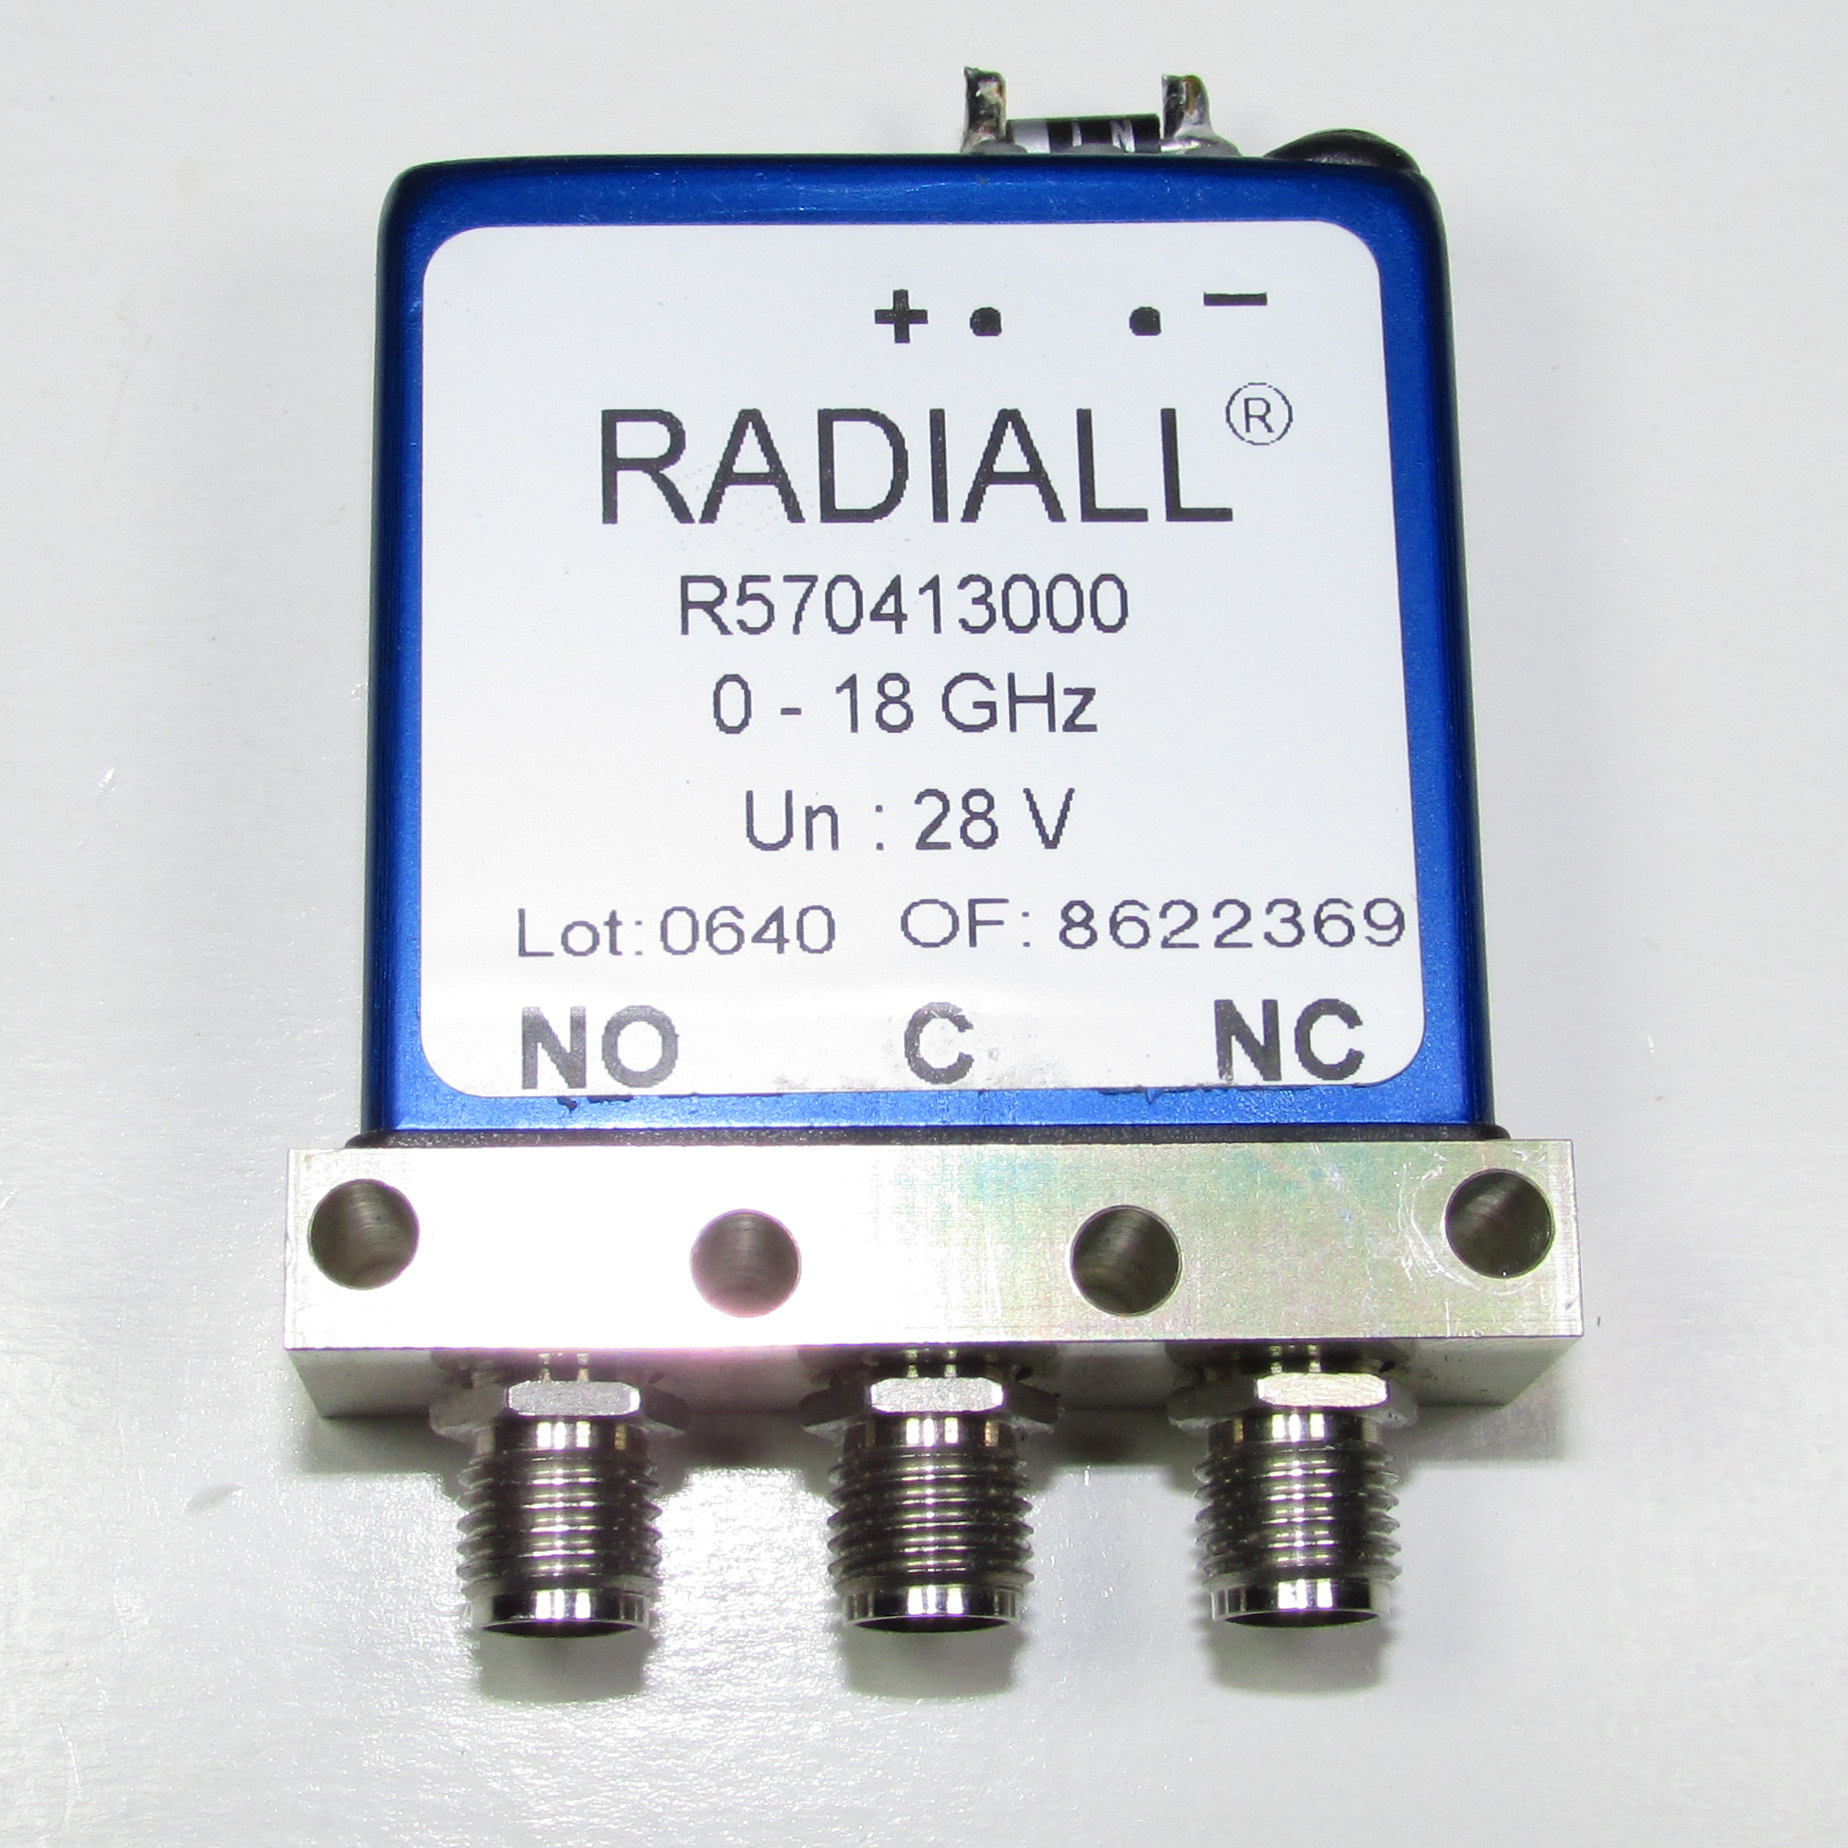 RADIALL R570413000 DC-18GHz 28V SMA RF microwave single pole double throw coaxial switch